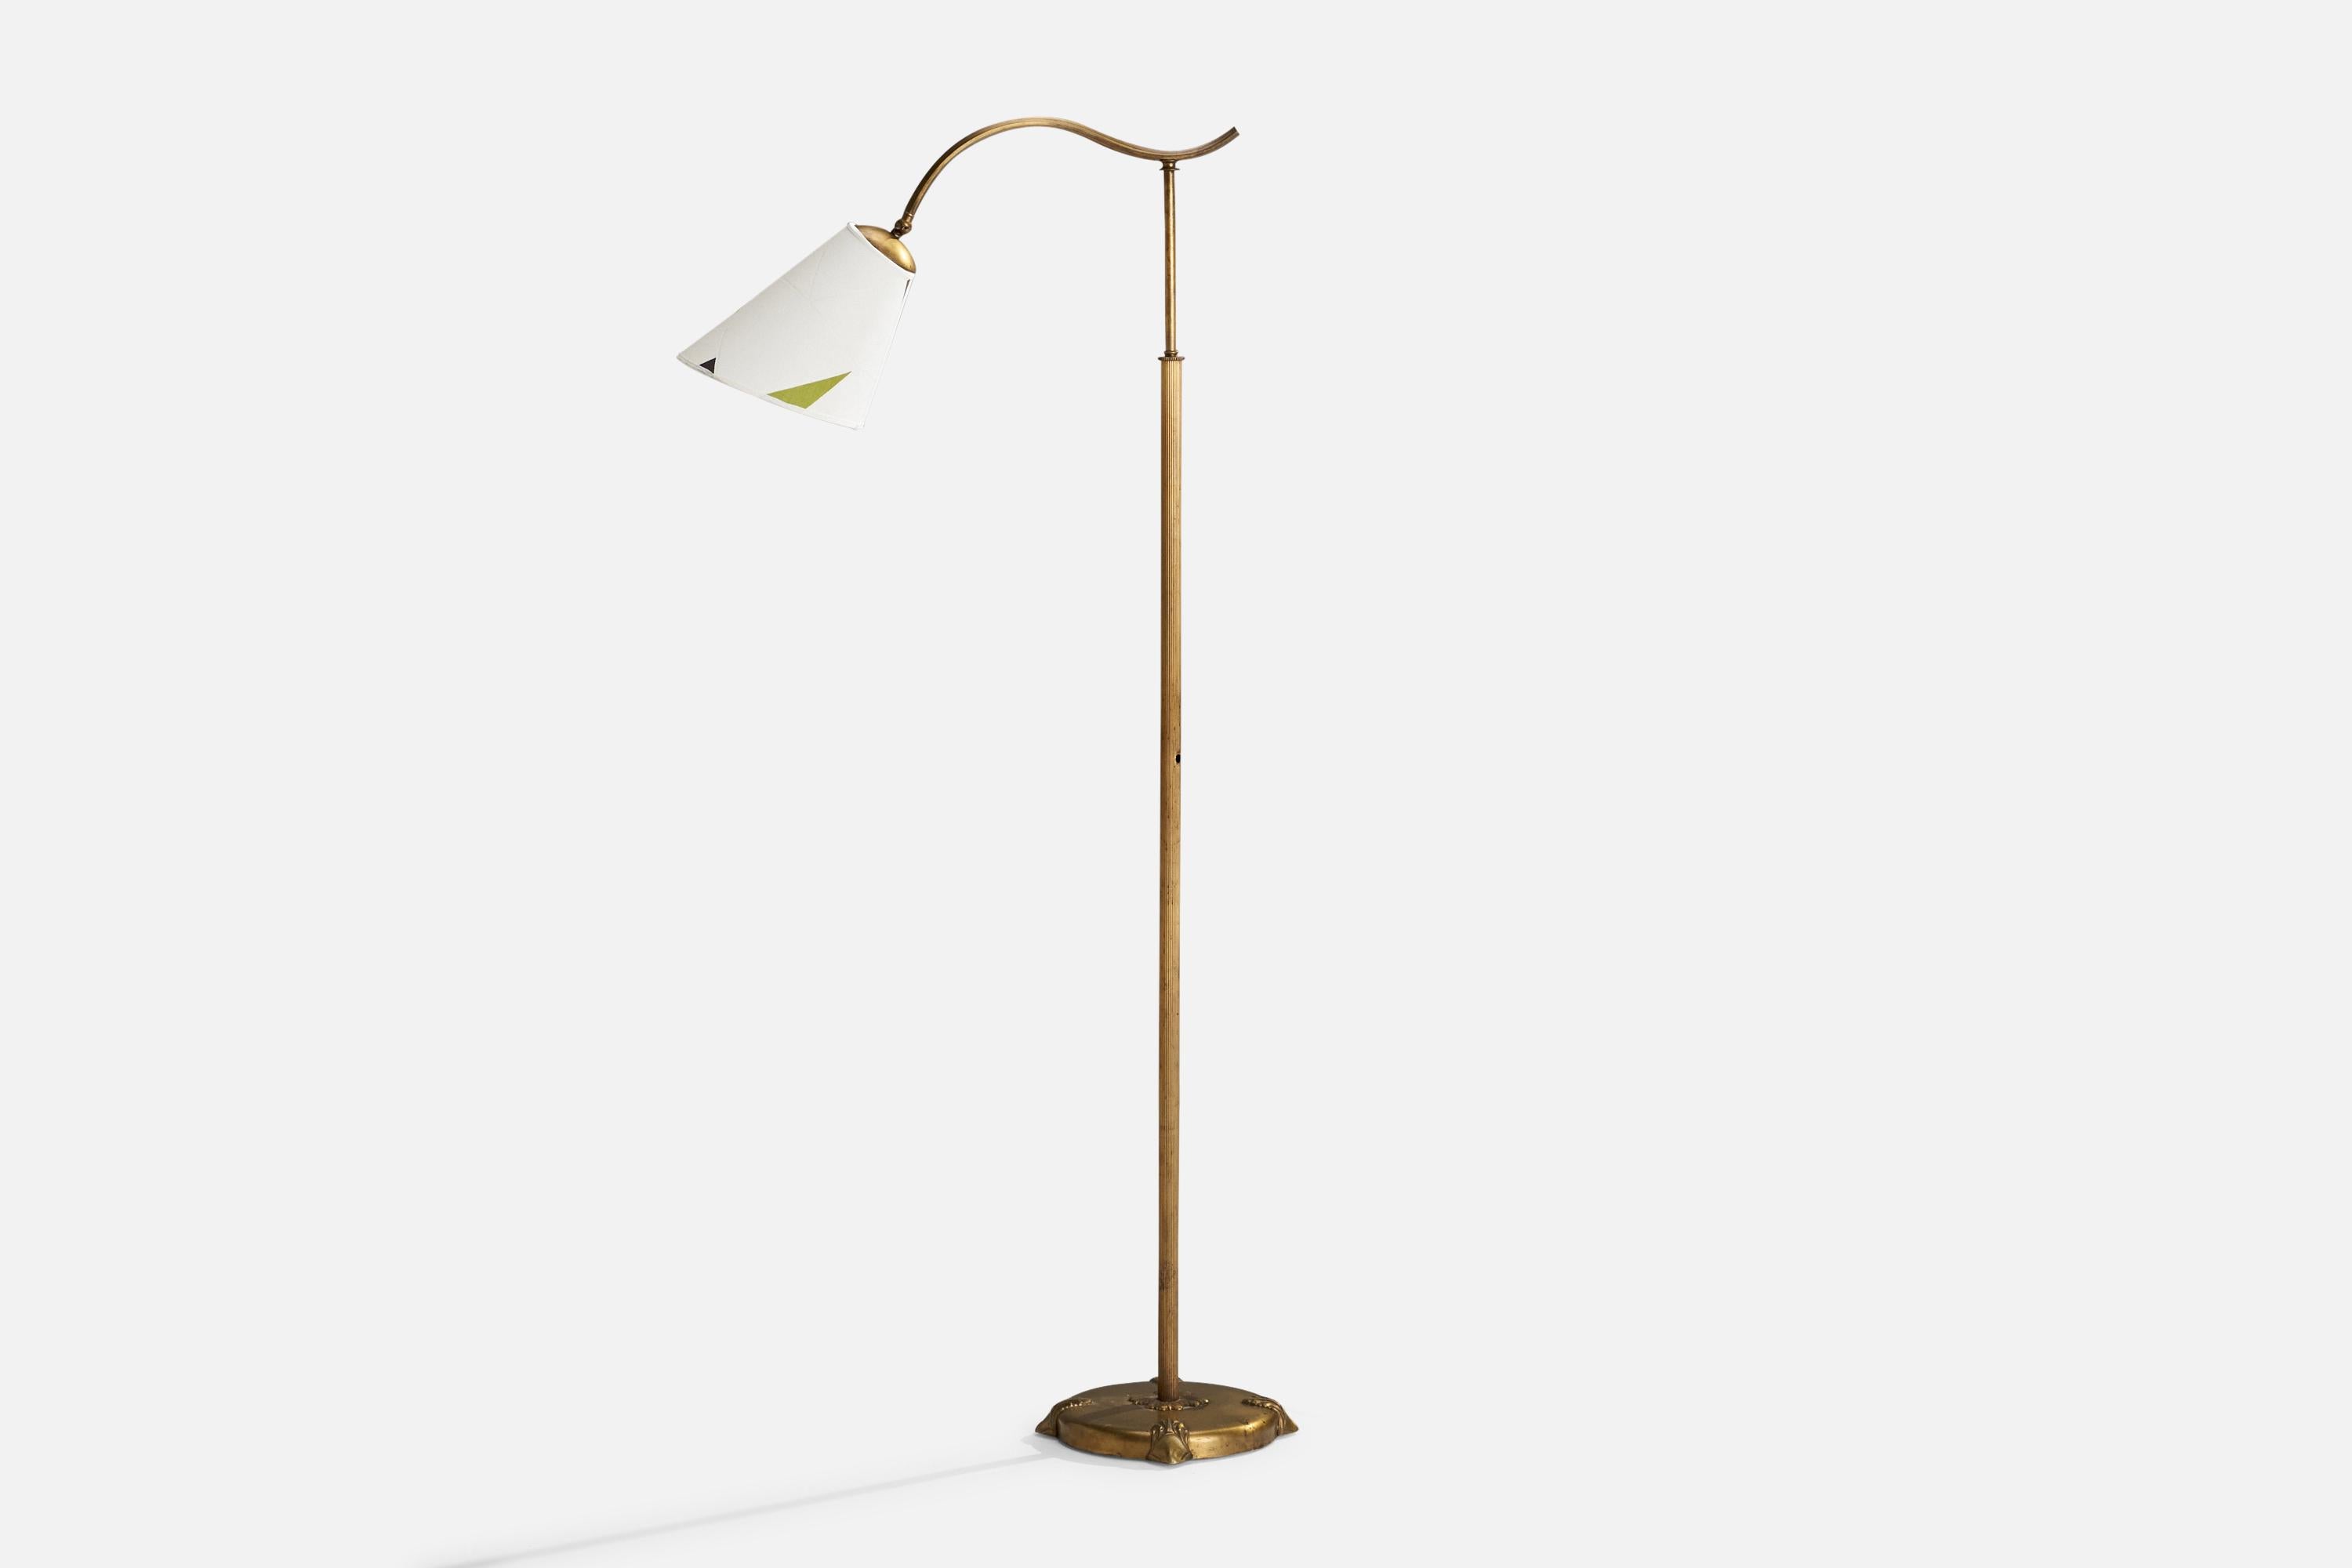 An adjustable brass and white fabric floor lamp designed and produced in Sweden, c. 1930s.

Overall Dimensions (inches): 59.5” H x 8.5” W x 28” D
Stated dimensions include shade.
Bulb Specifications: E-26 Bulb
Number of Sockets: 1
All lighting will